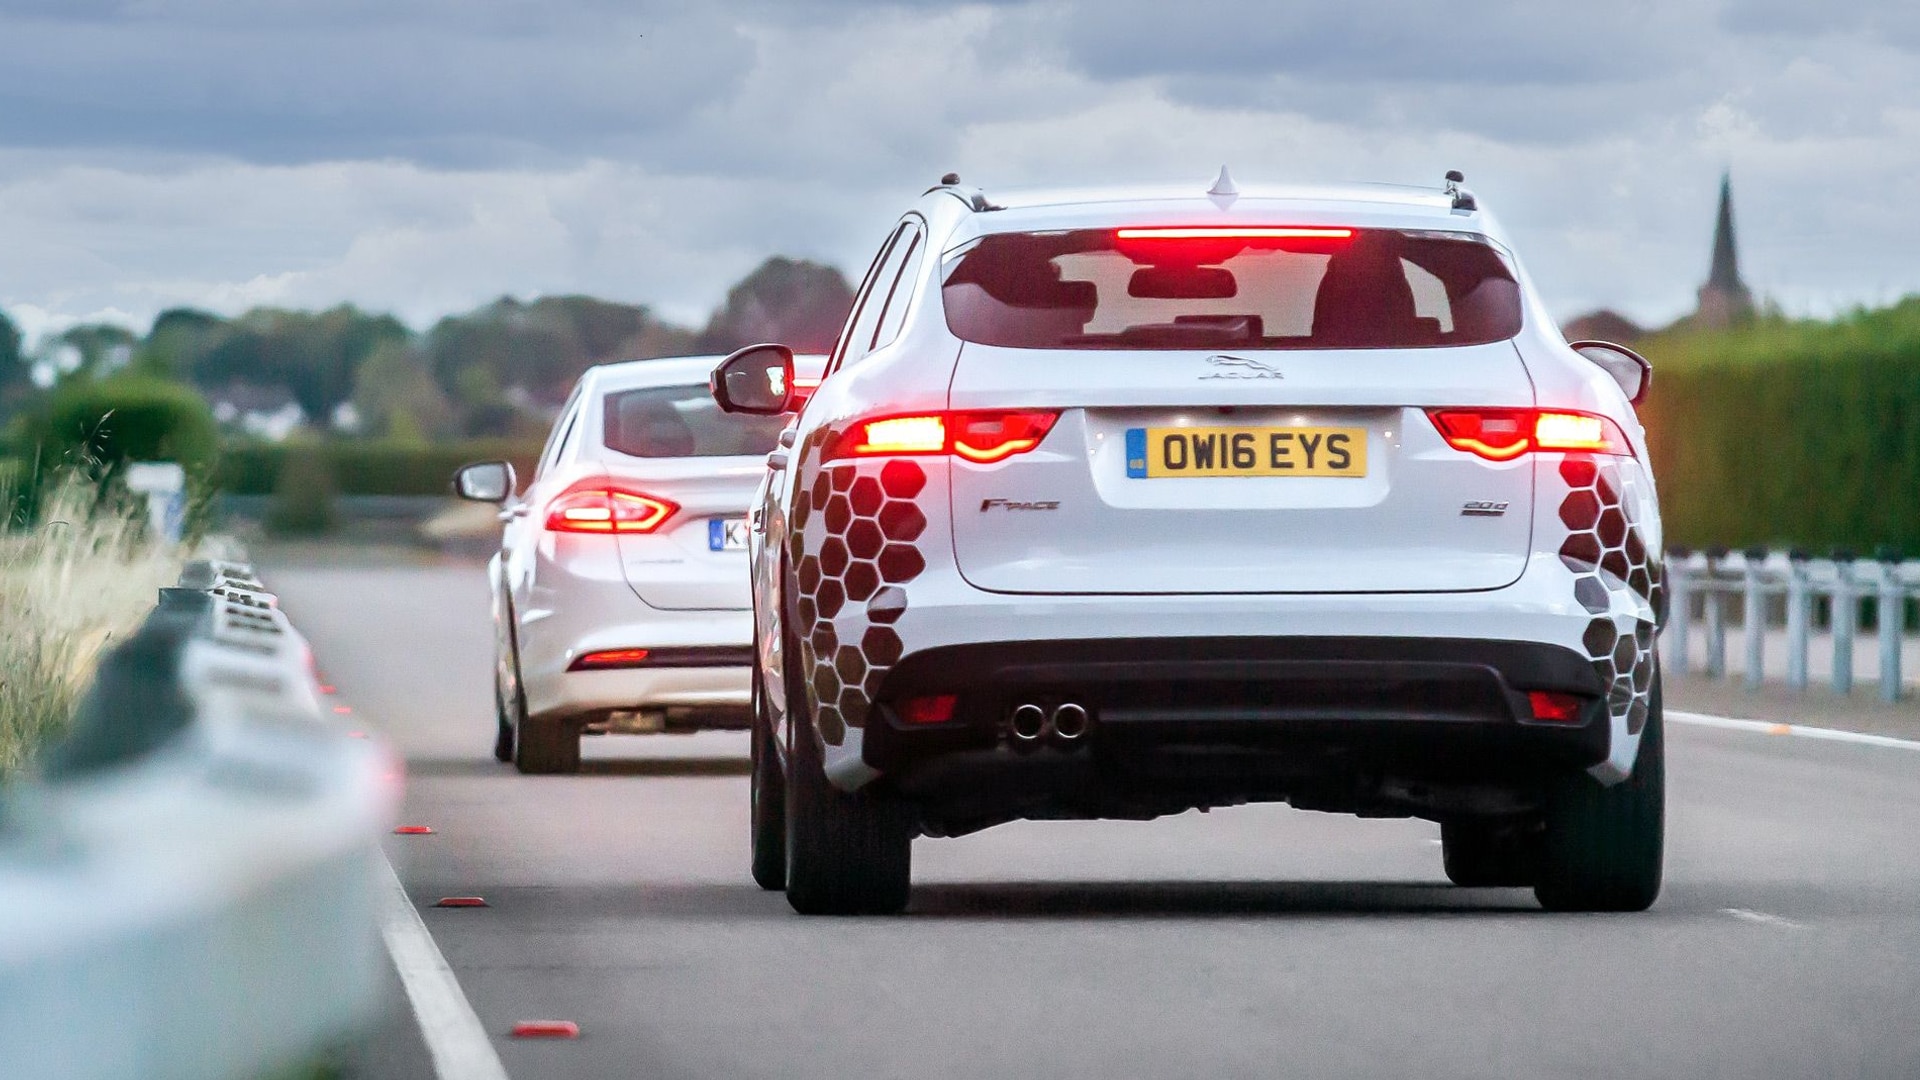 Connected and self-driving car trial in United Kingdom